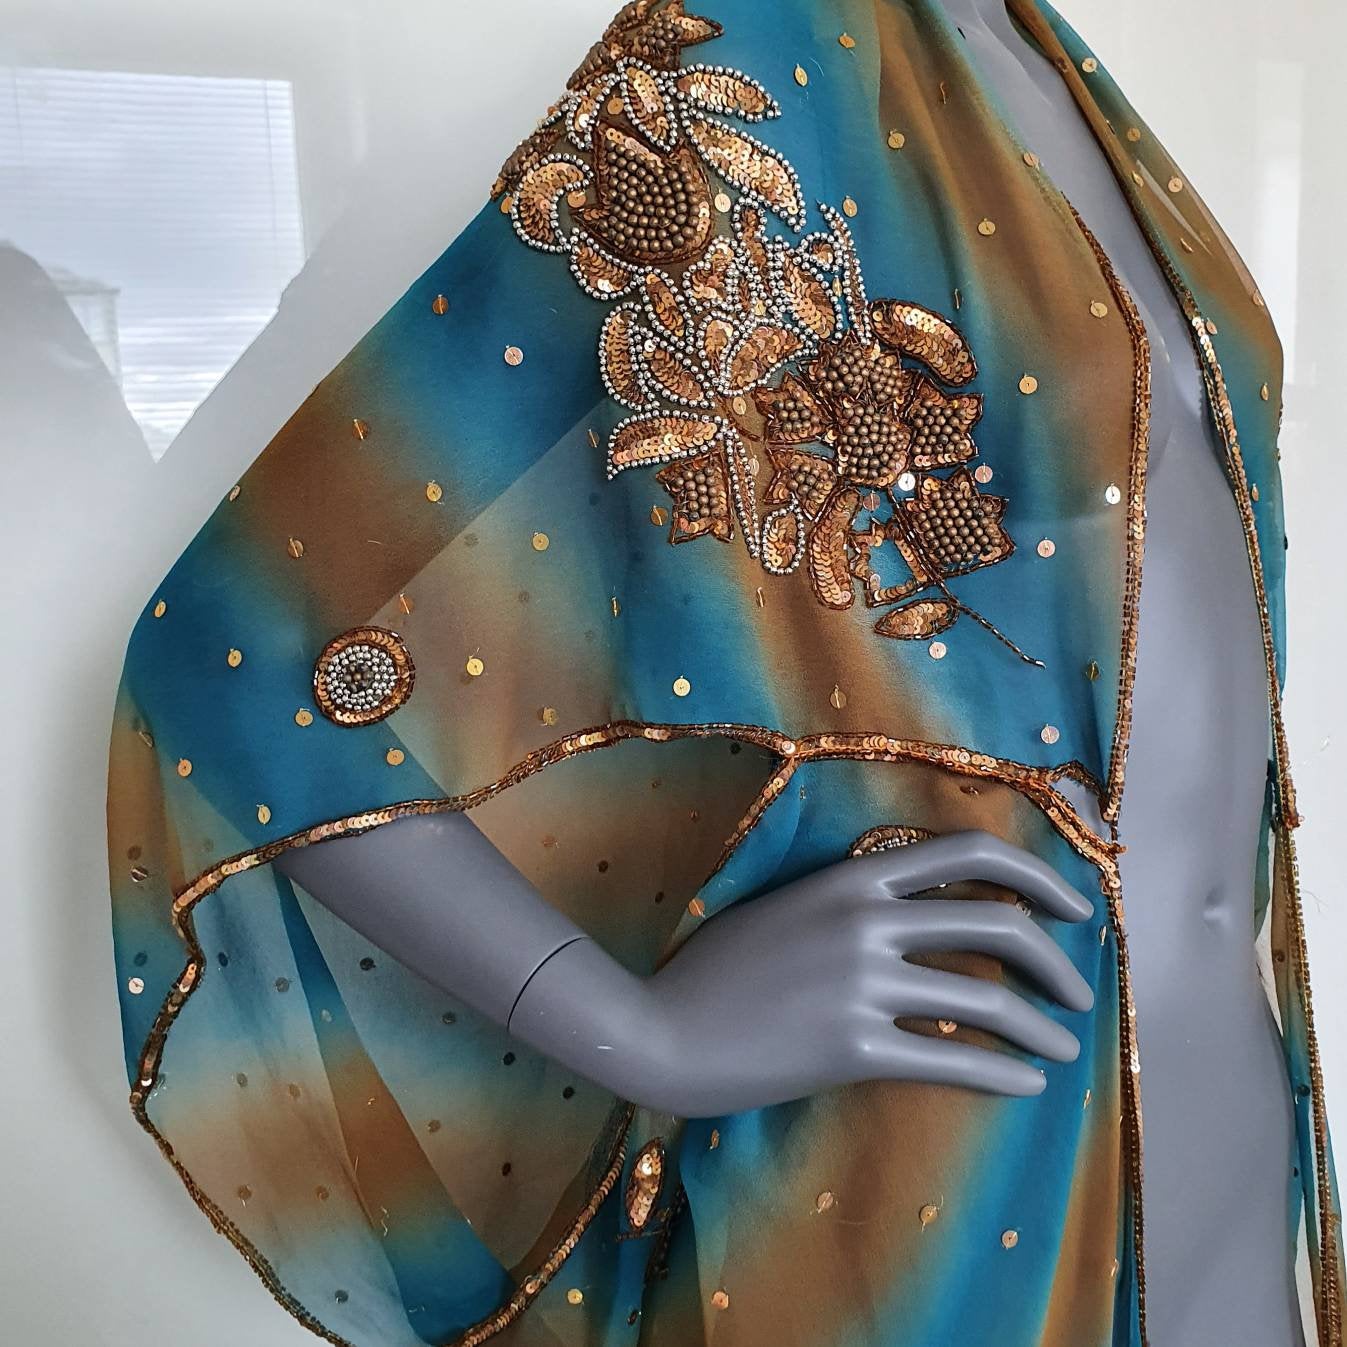 Draped kimono in teal and brown with elaborated hand embroidery with bronze sequins and beads (M-L)